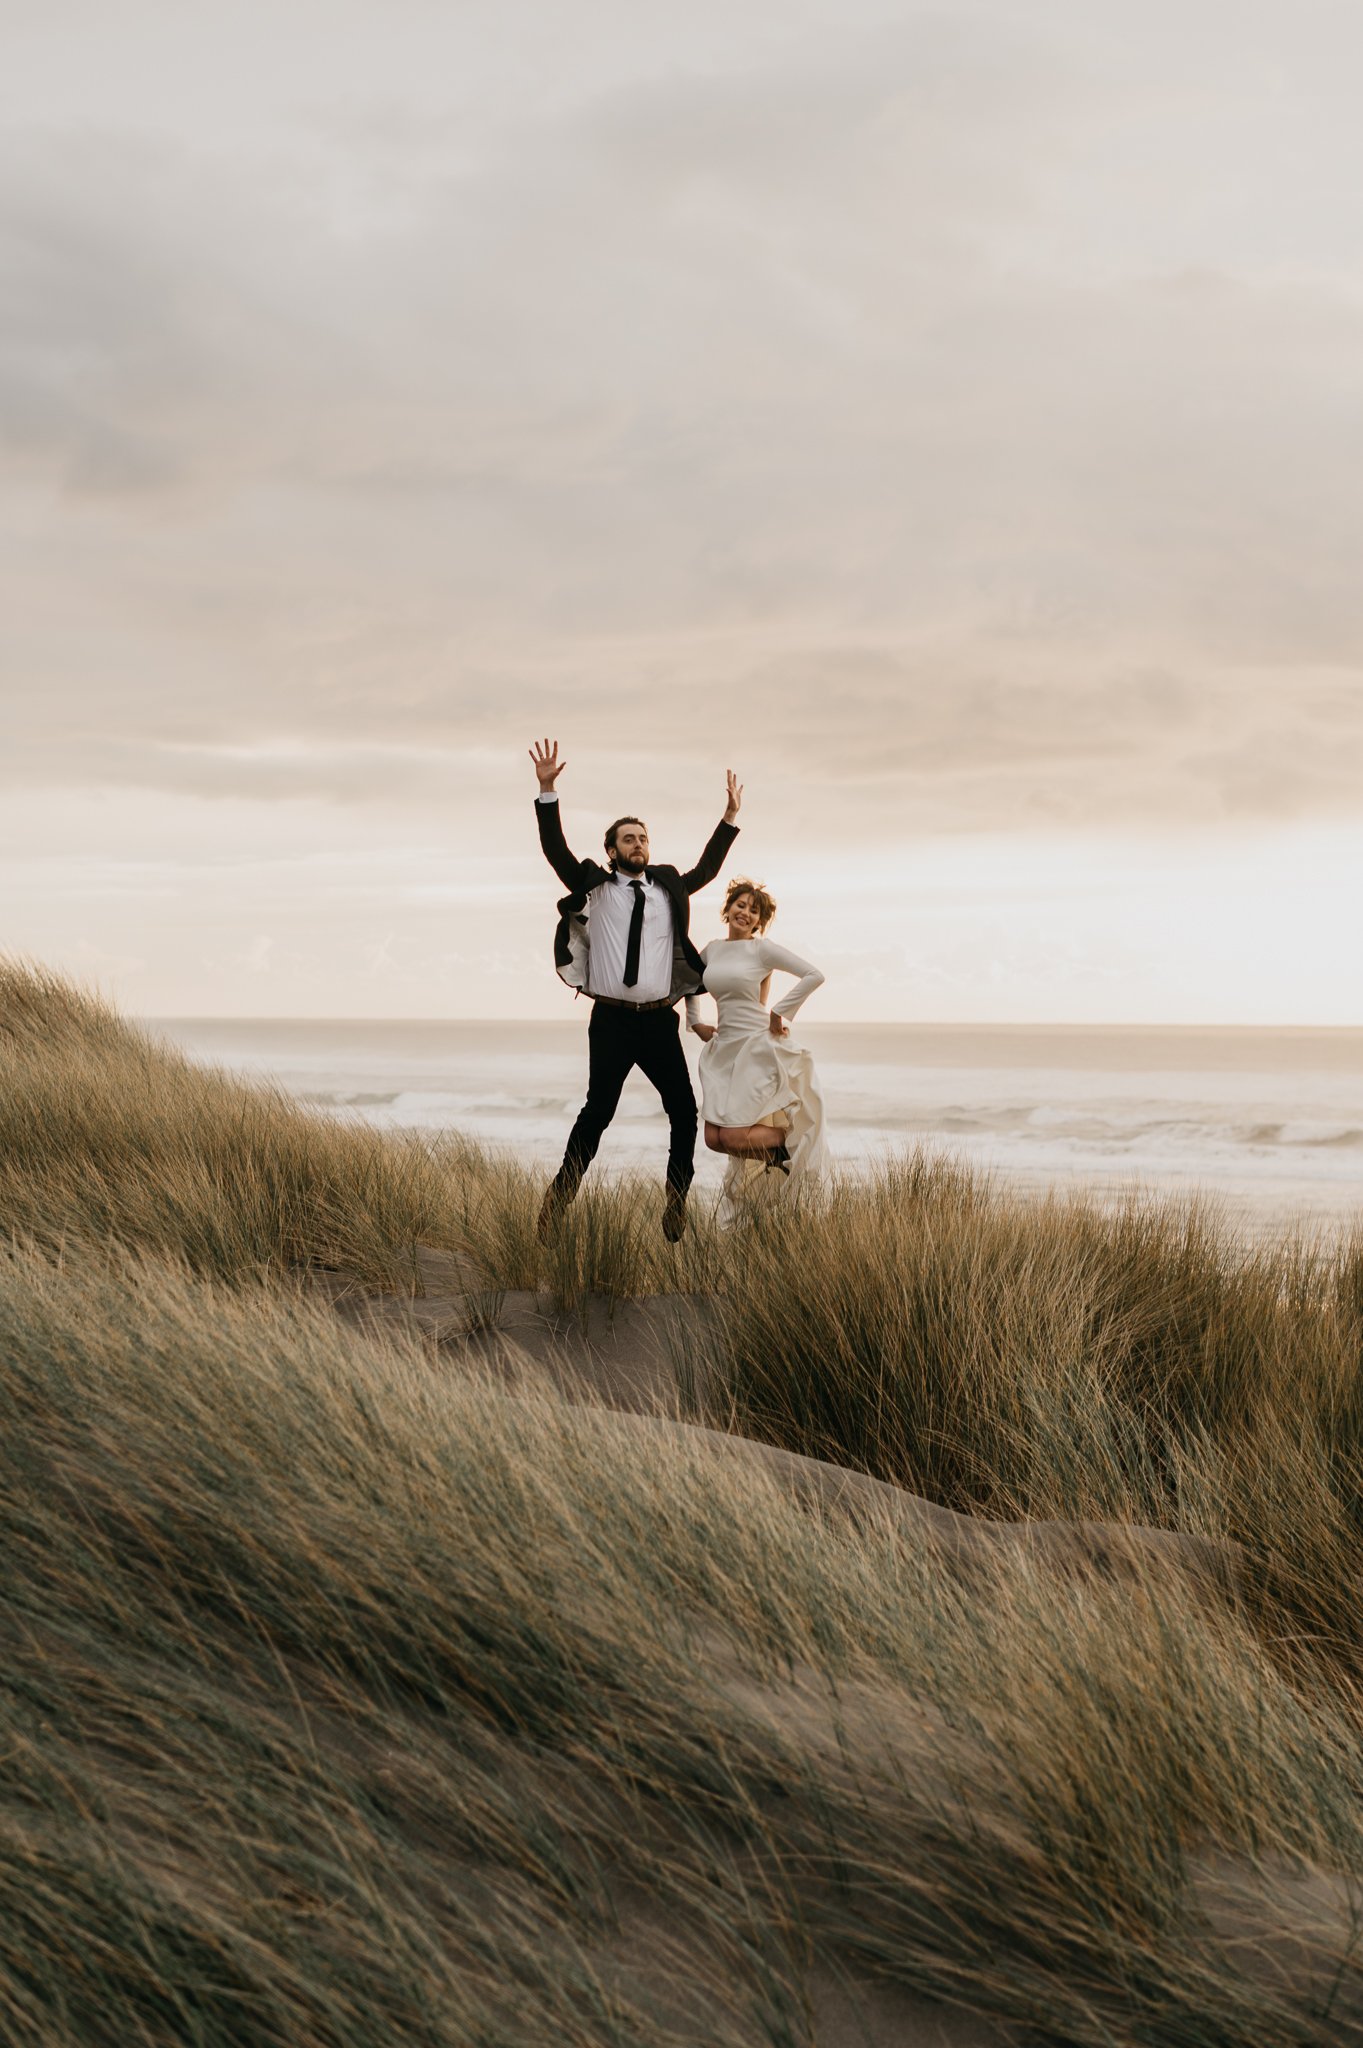 Bride and groom in wedding attire on sand dune with tall sea grass around them jumping up in the air with joy.